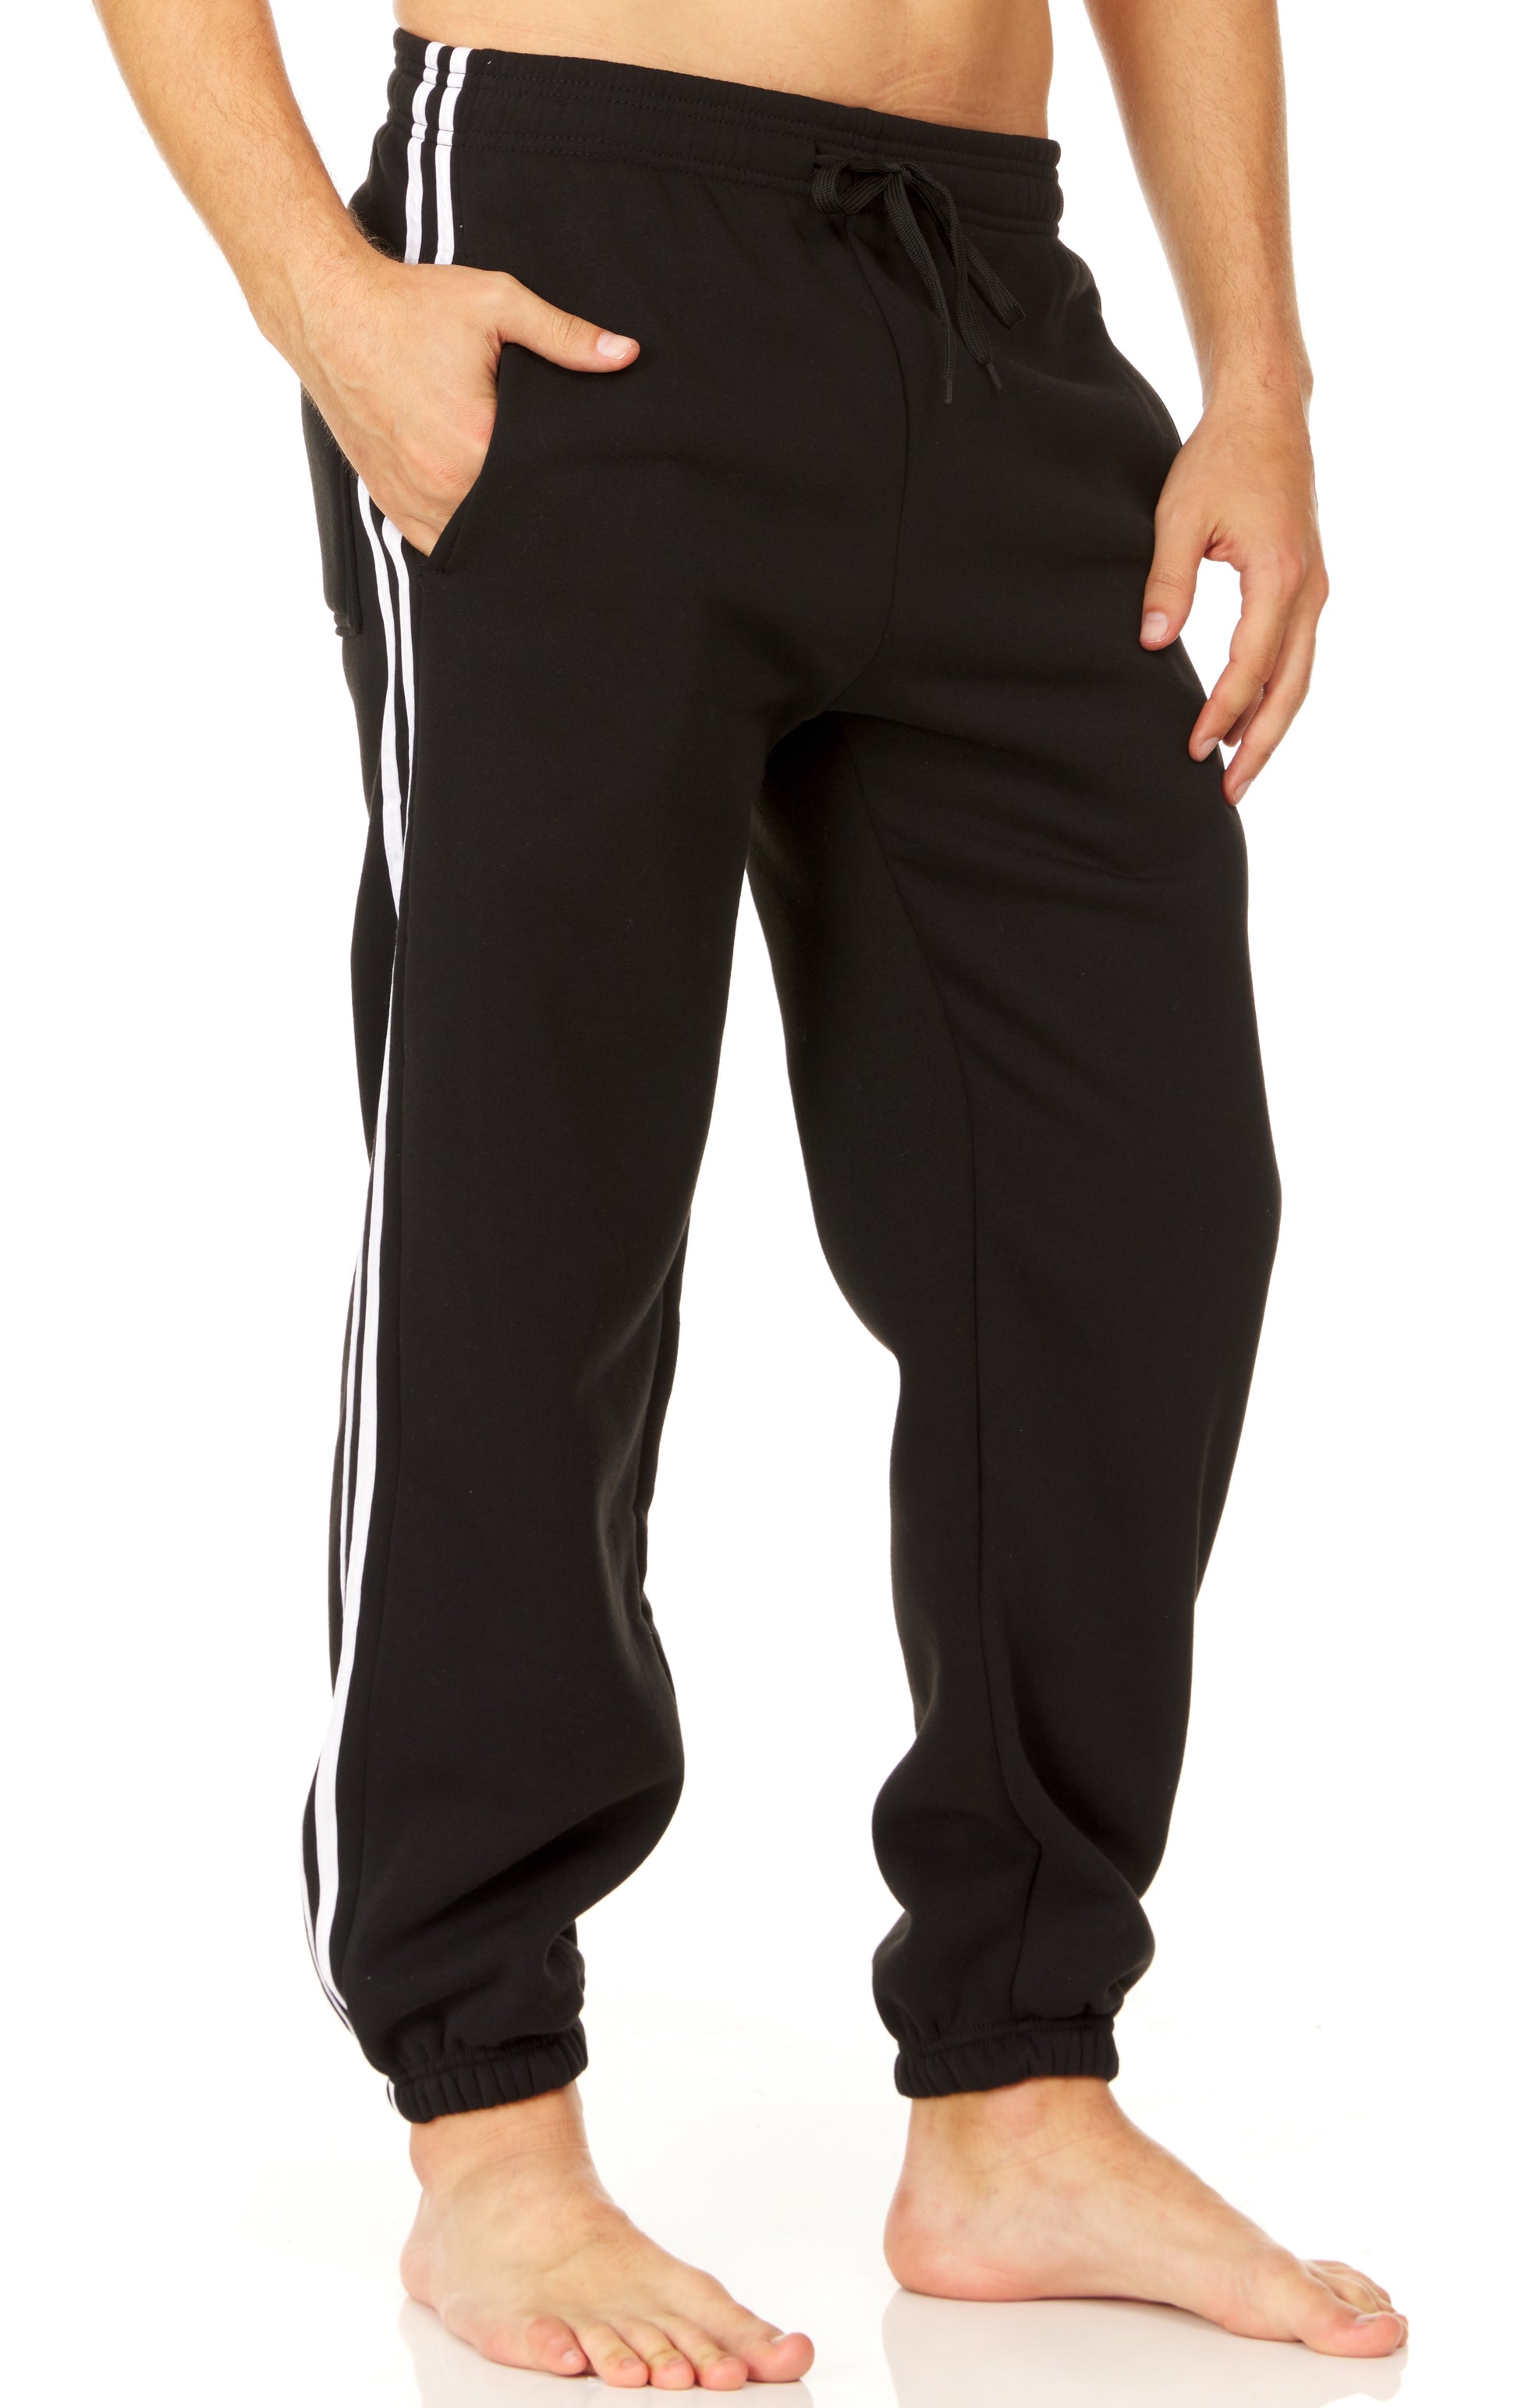 Mens Baggy Fleece Sweatpants Open Bottom Drawstring Waistband with Stripes - Unique Styles Asfoor